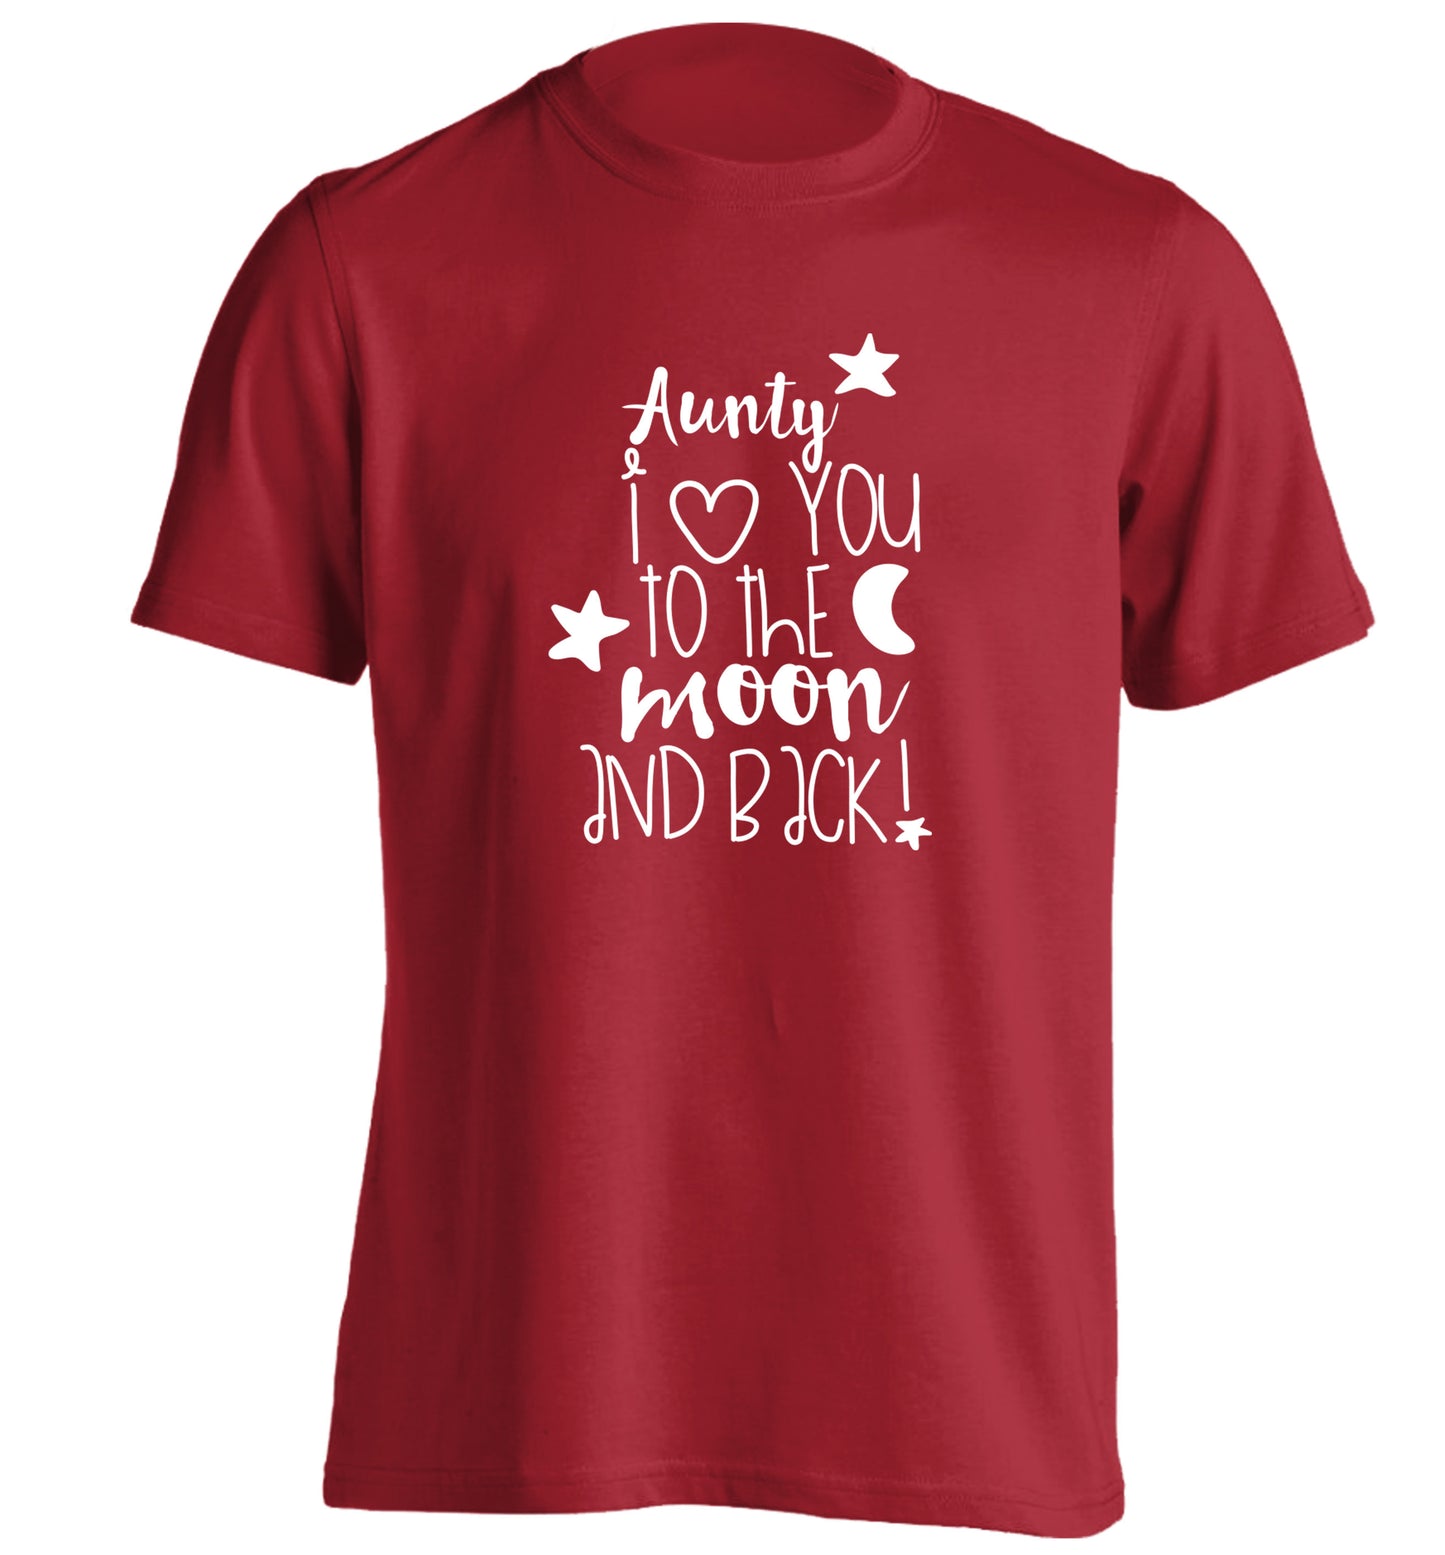 Aunty I love you to the moon and back adults unisex red Tshirt 2XL